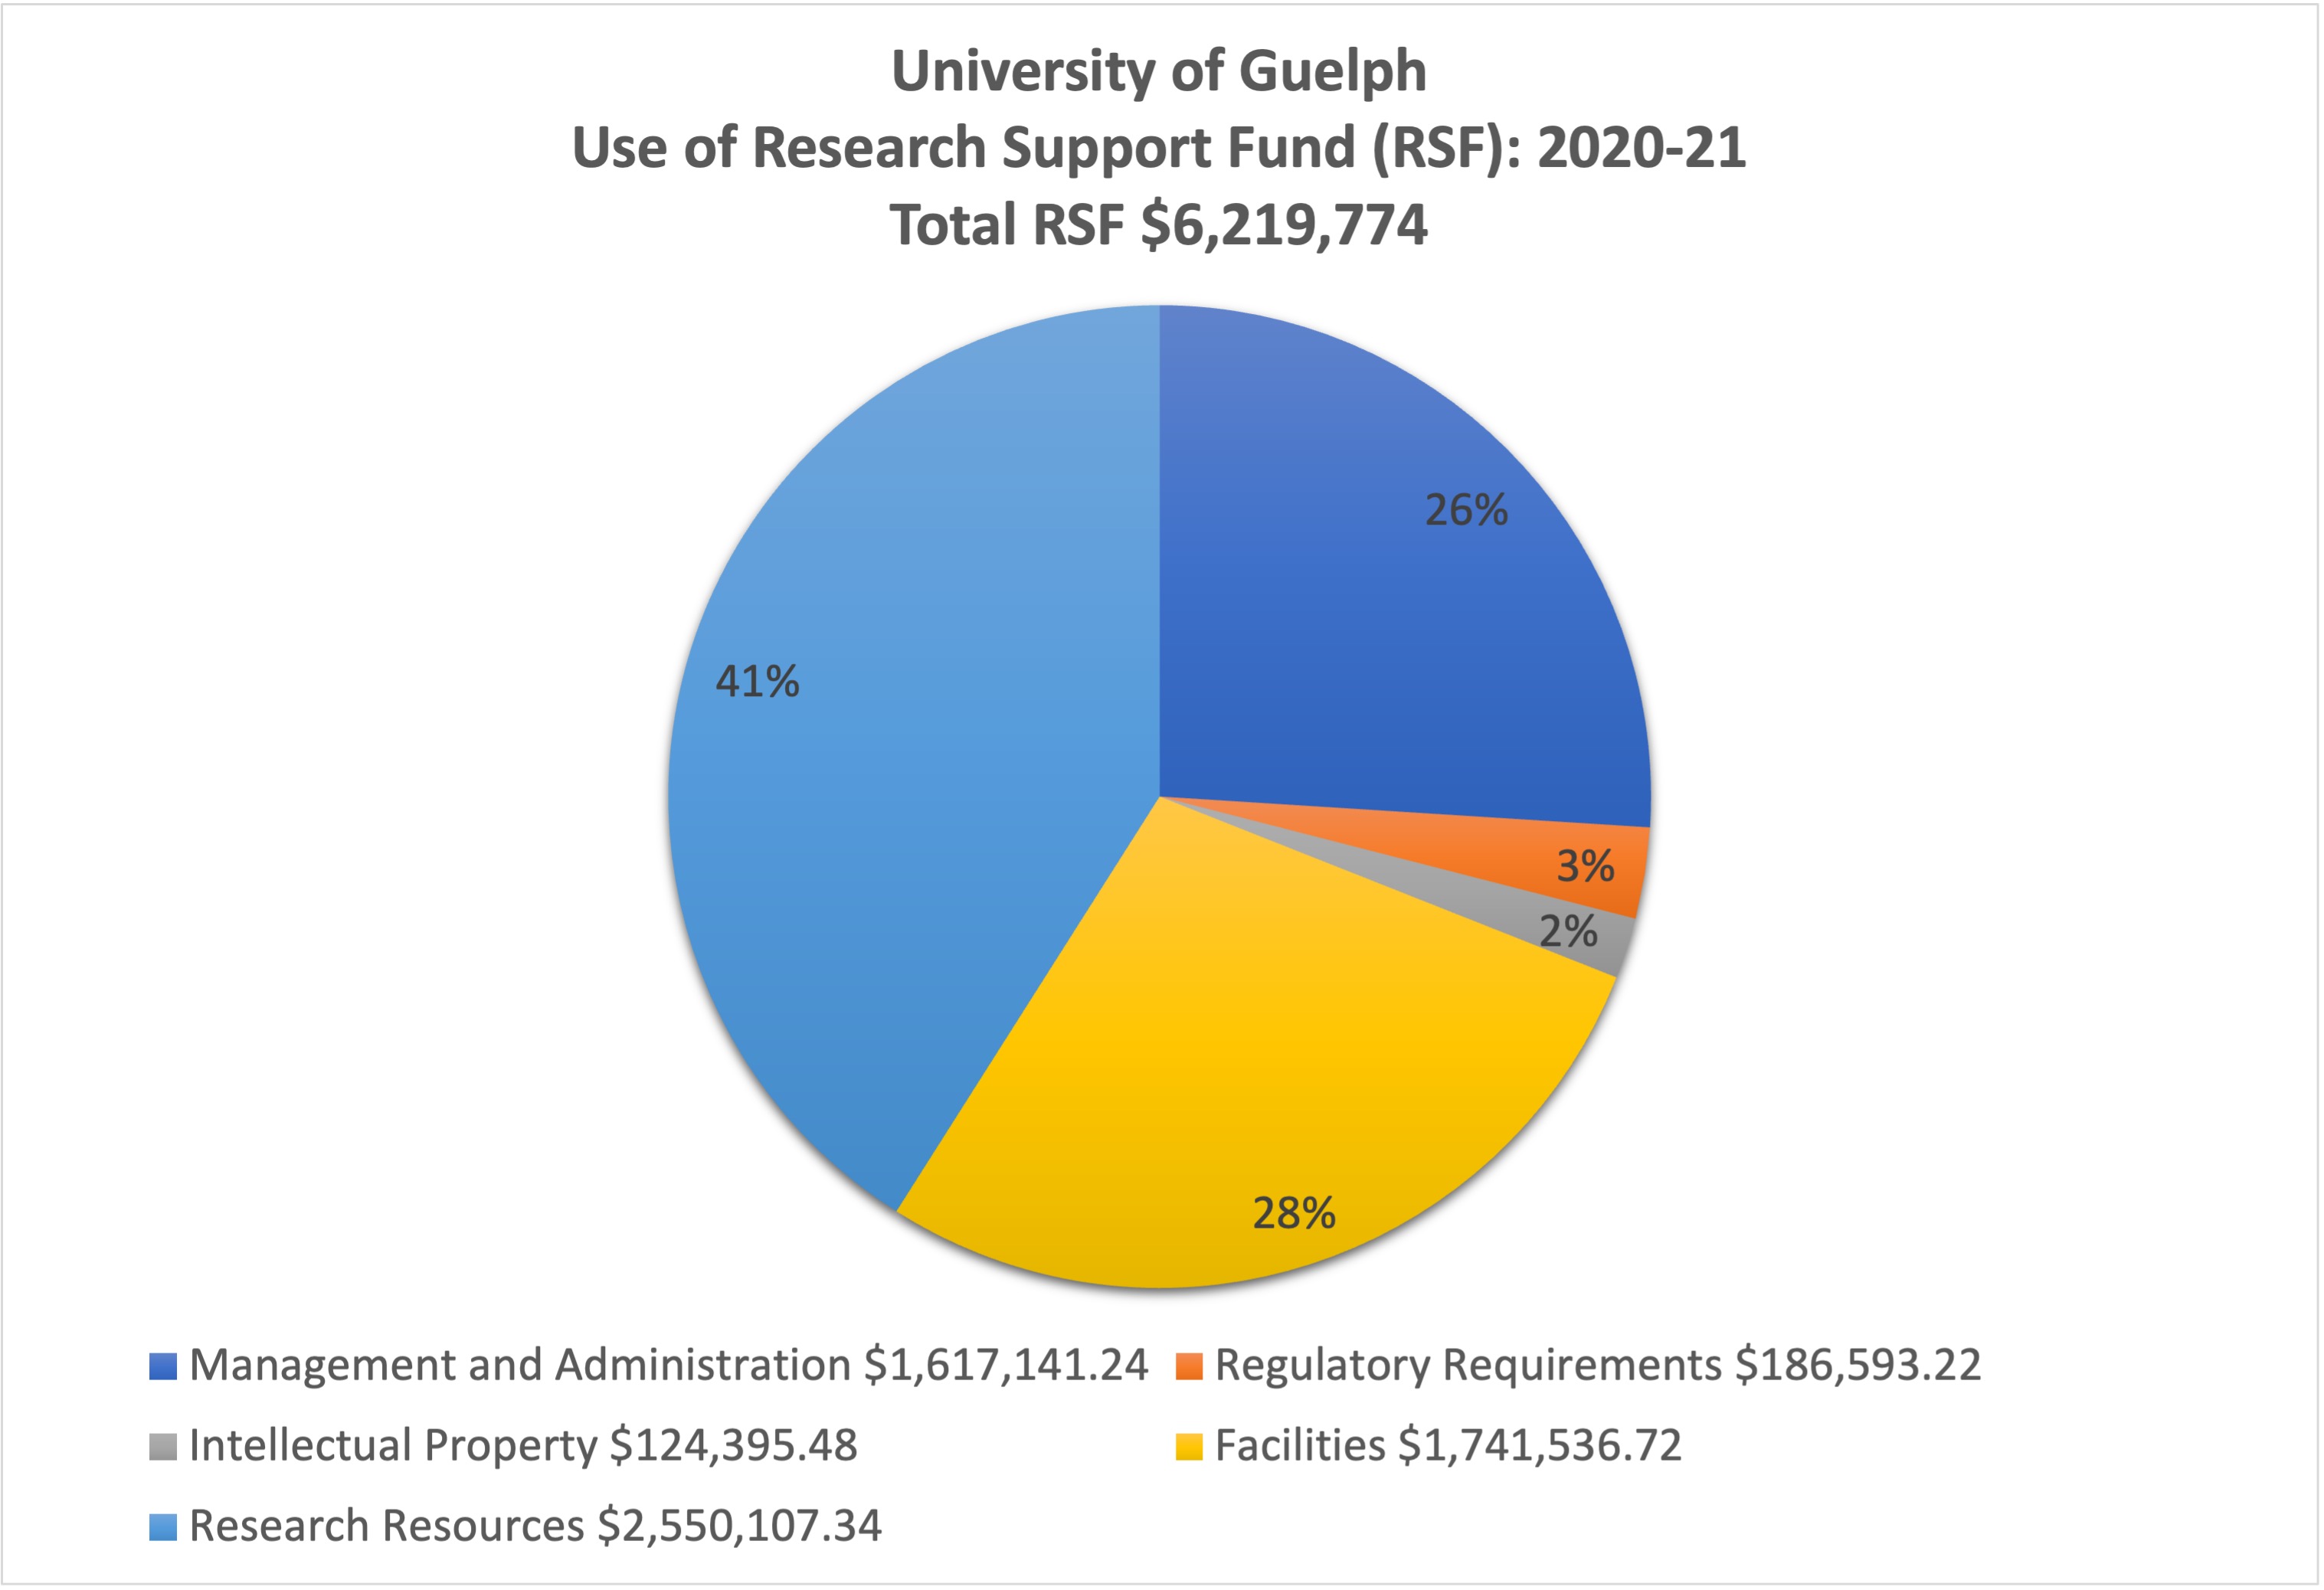 University of Guelph - Use of Research Support Fund (RSF): 2020-21 - Total RSF $6,219,774. Management and Administration - $1,617,141.24. Regulatory Requirements - $186.593.22. Intellectual Property - $124,395.48. Facilities - $1,741,536.72. Research Resources $2,550,107.34.